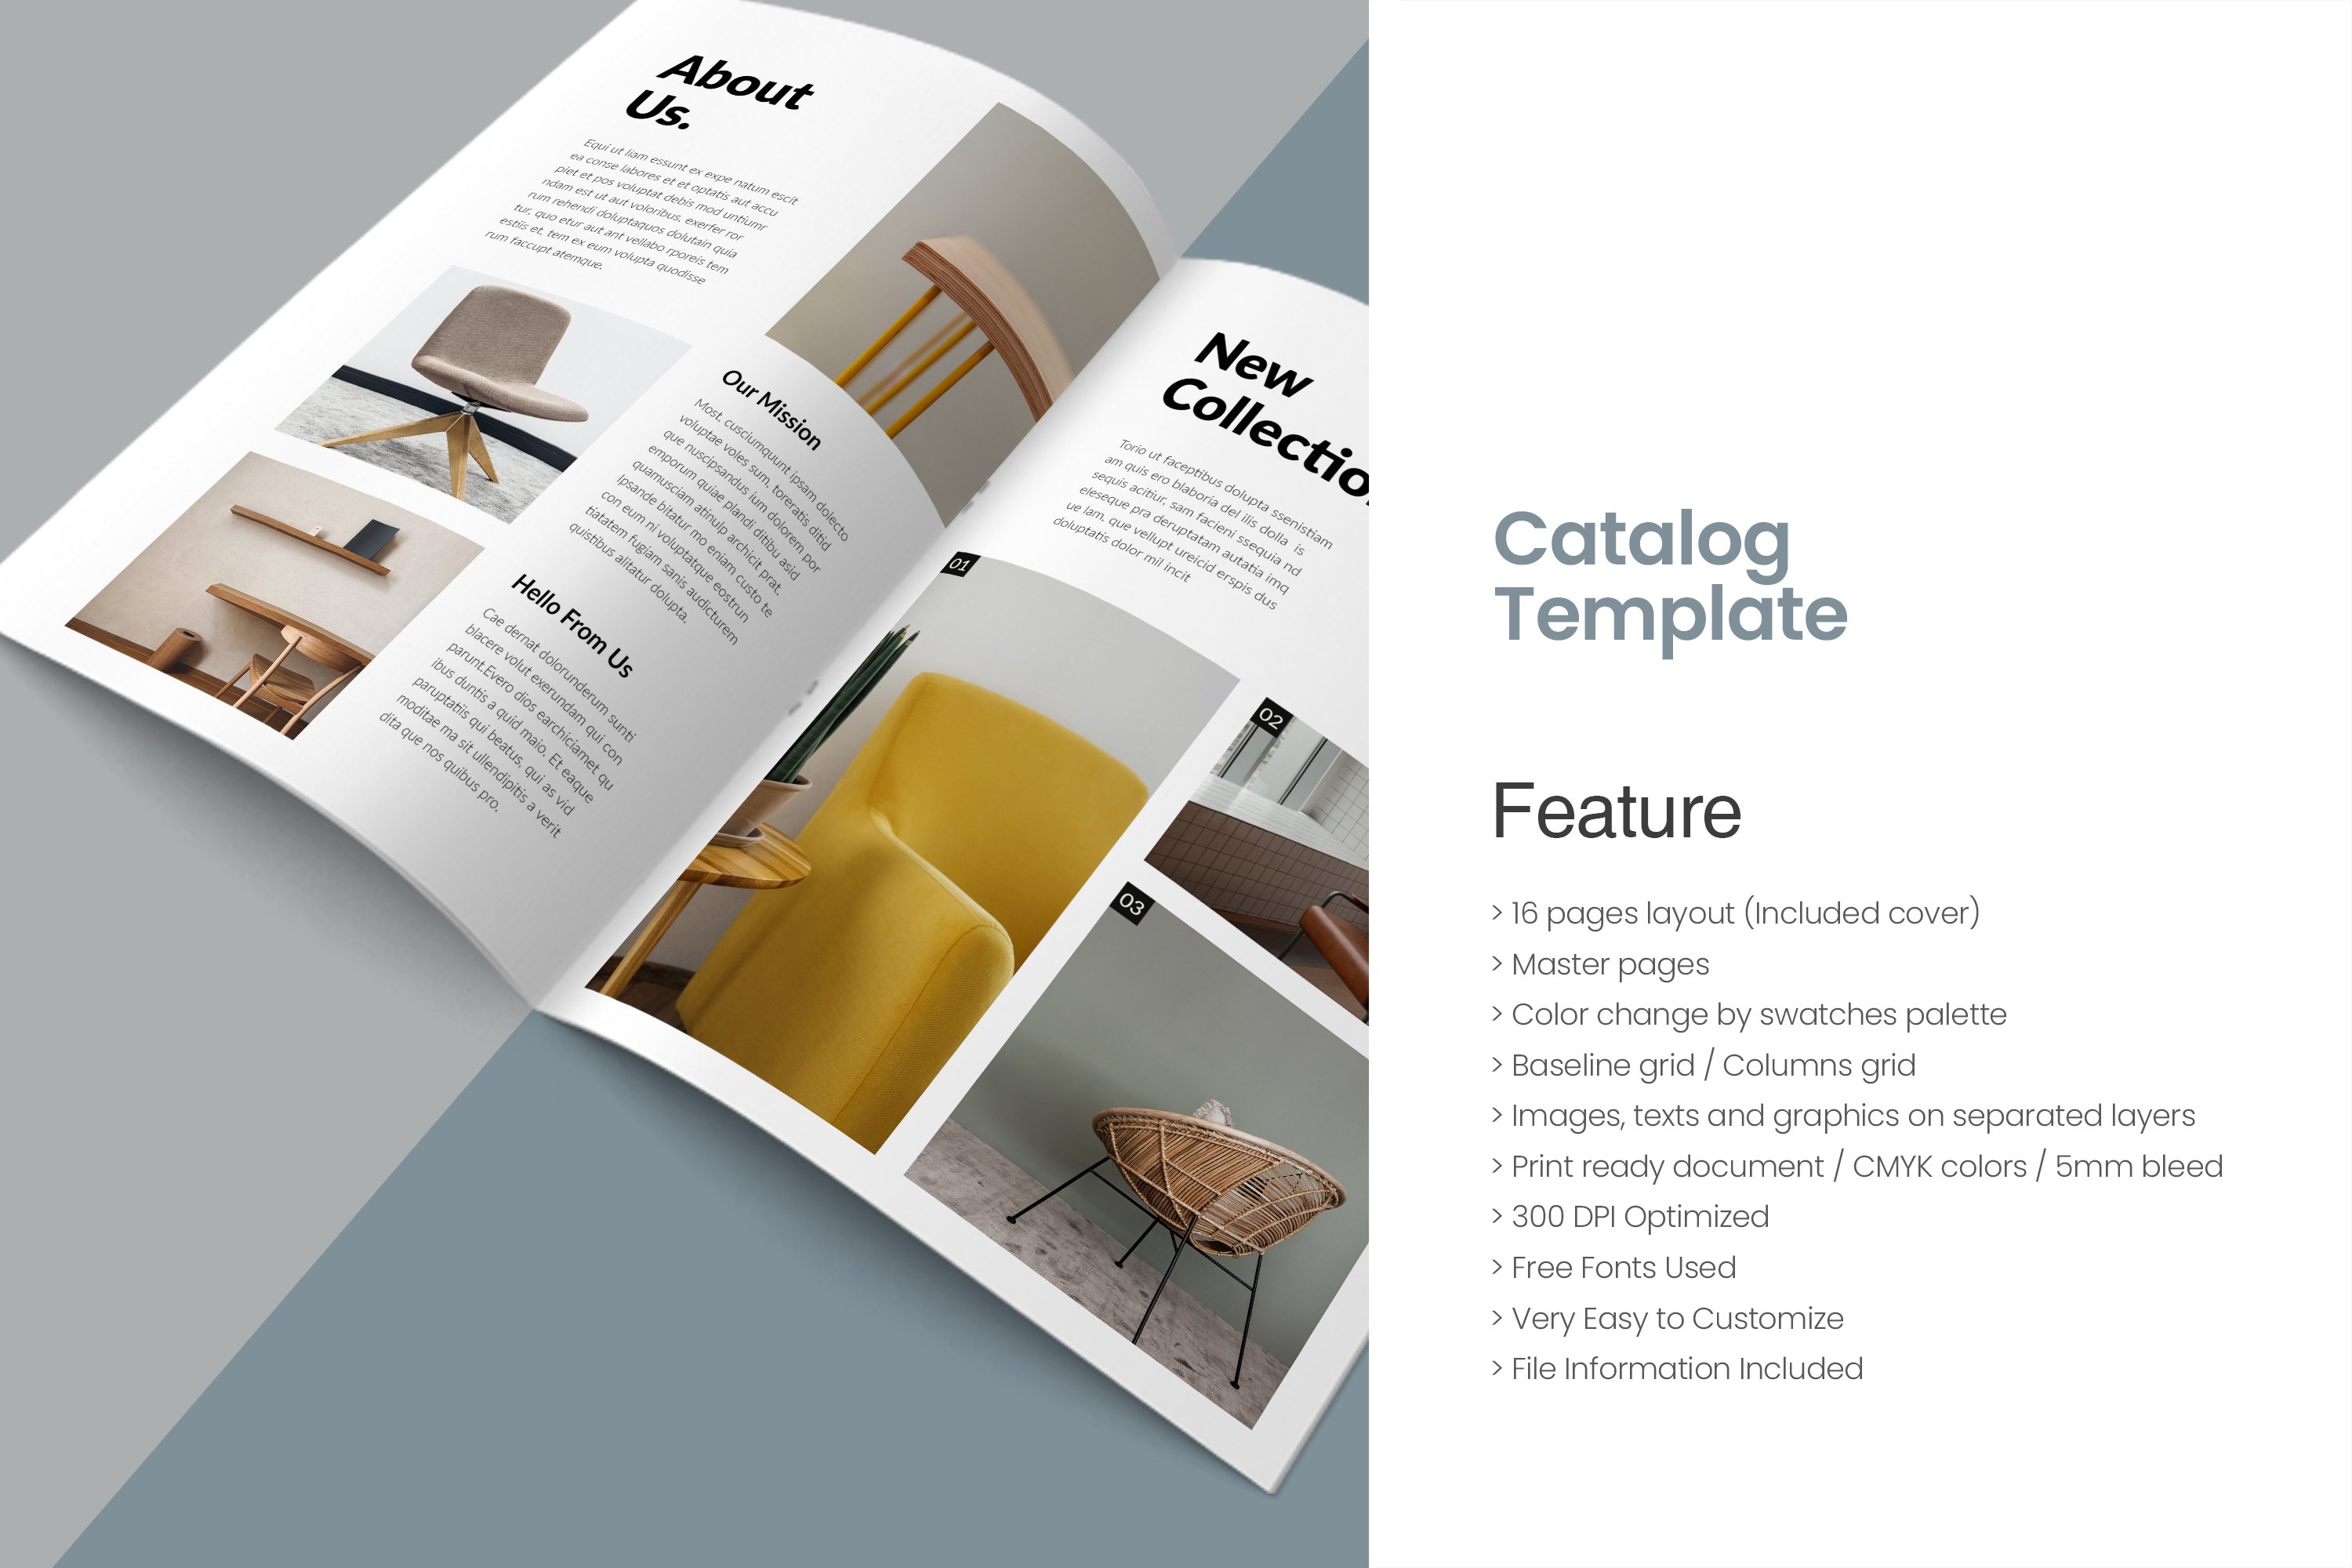 Product Catalog Template preview image.